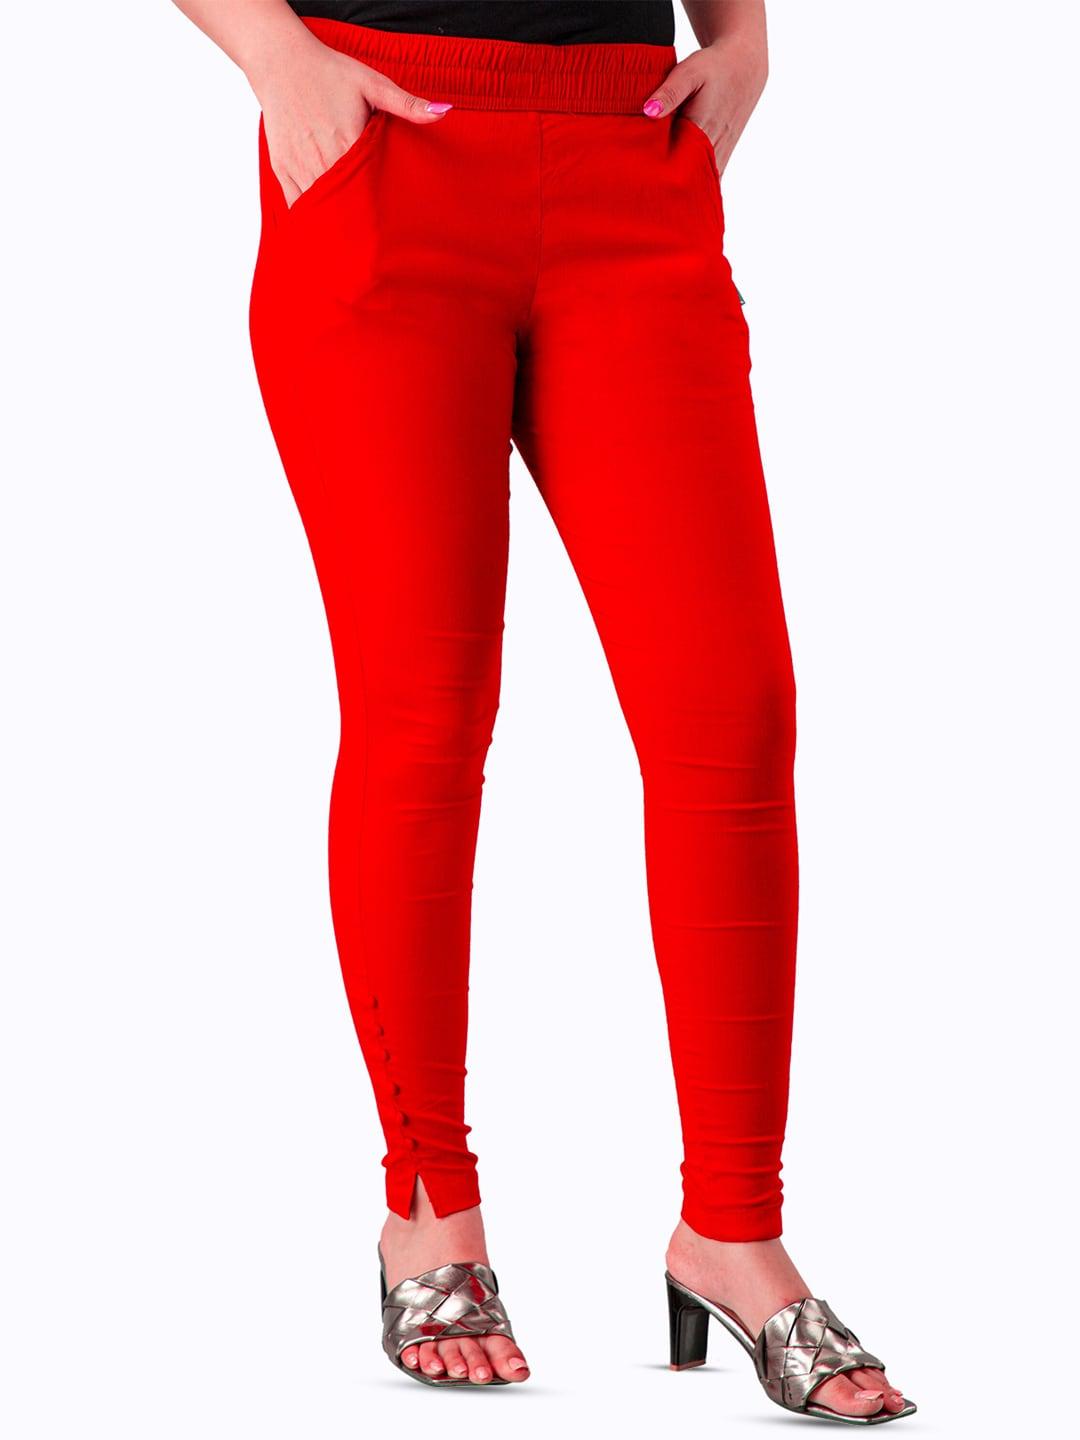 baesd-women-relaxed-fit-stretchable-jeggings